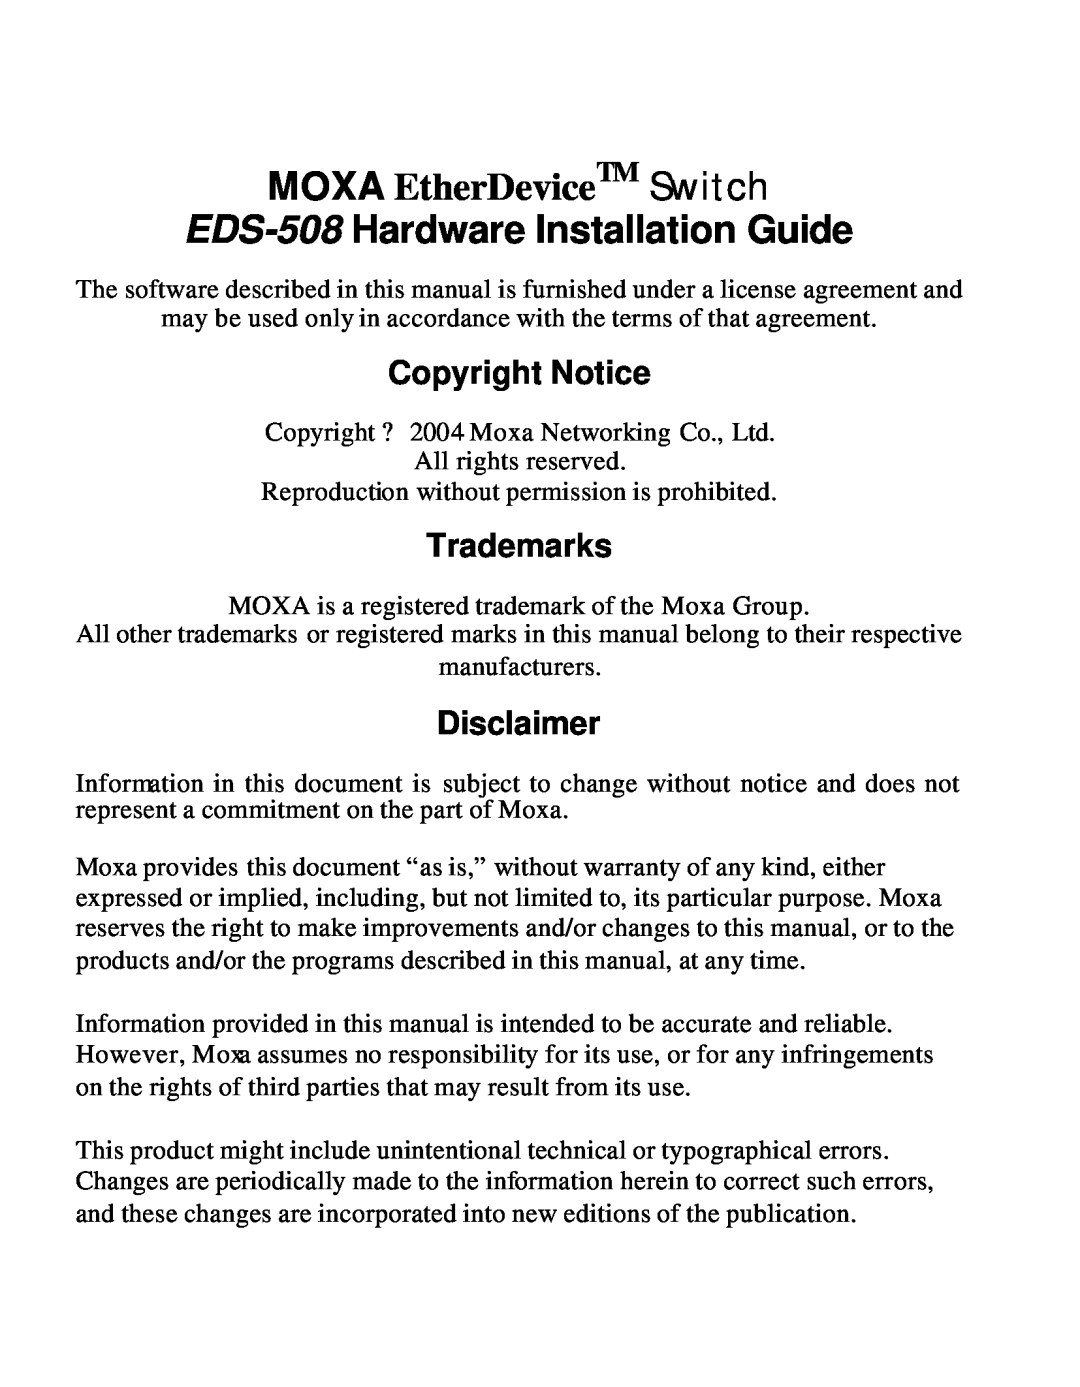 Moxa Technologies manual MOXA EtherDeviceTM Switch, EDS-508 Hardware Installation Guide, Copyright Notice, Trademarks 